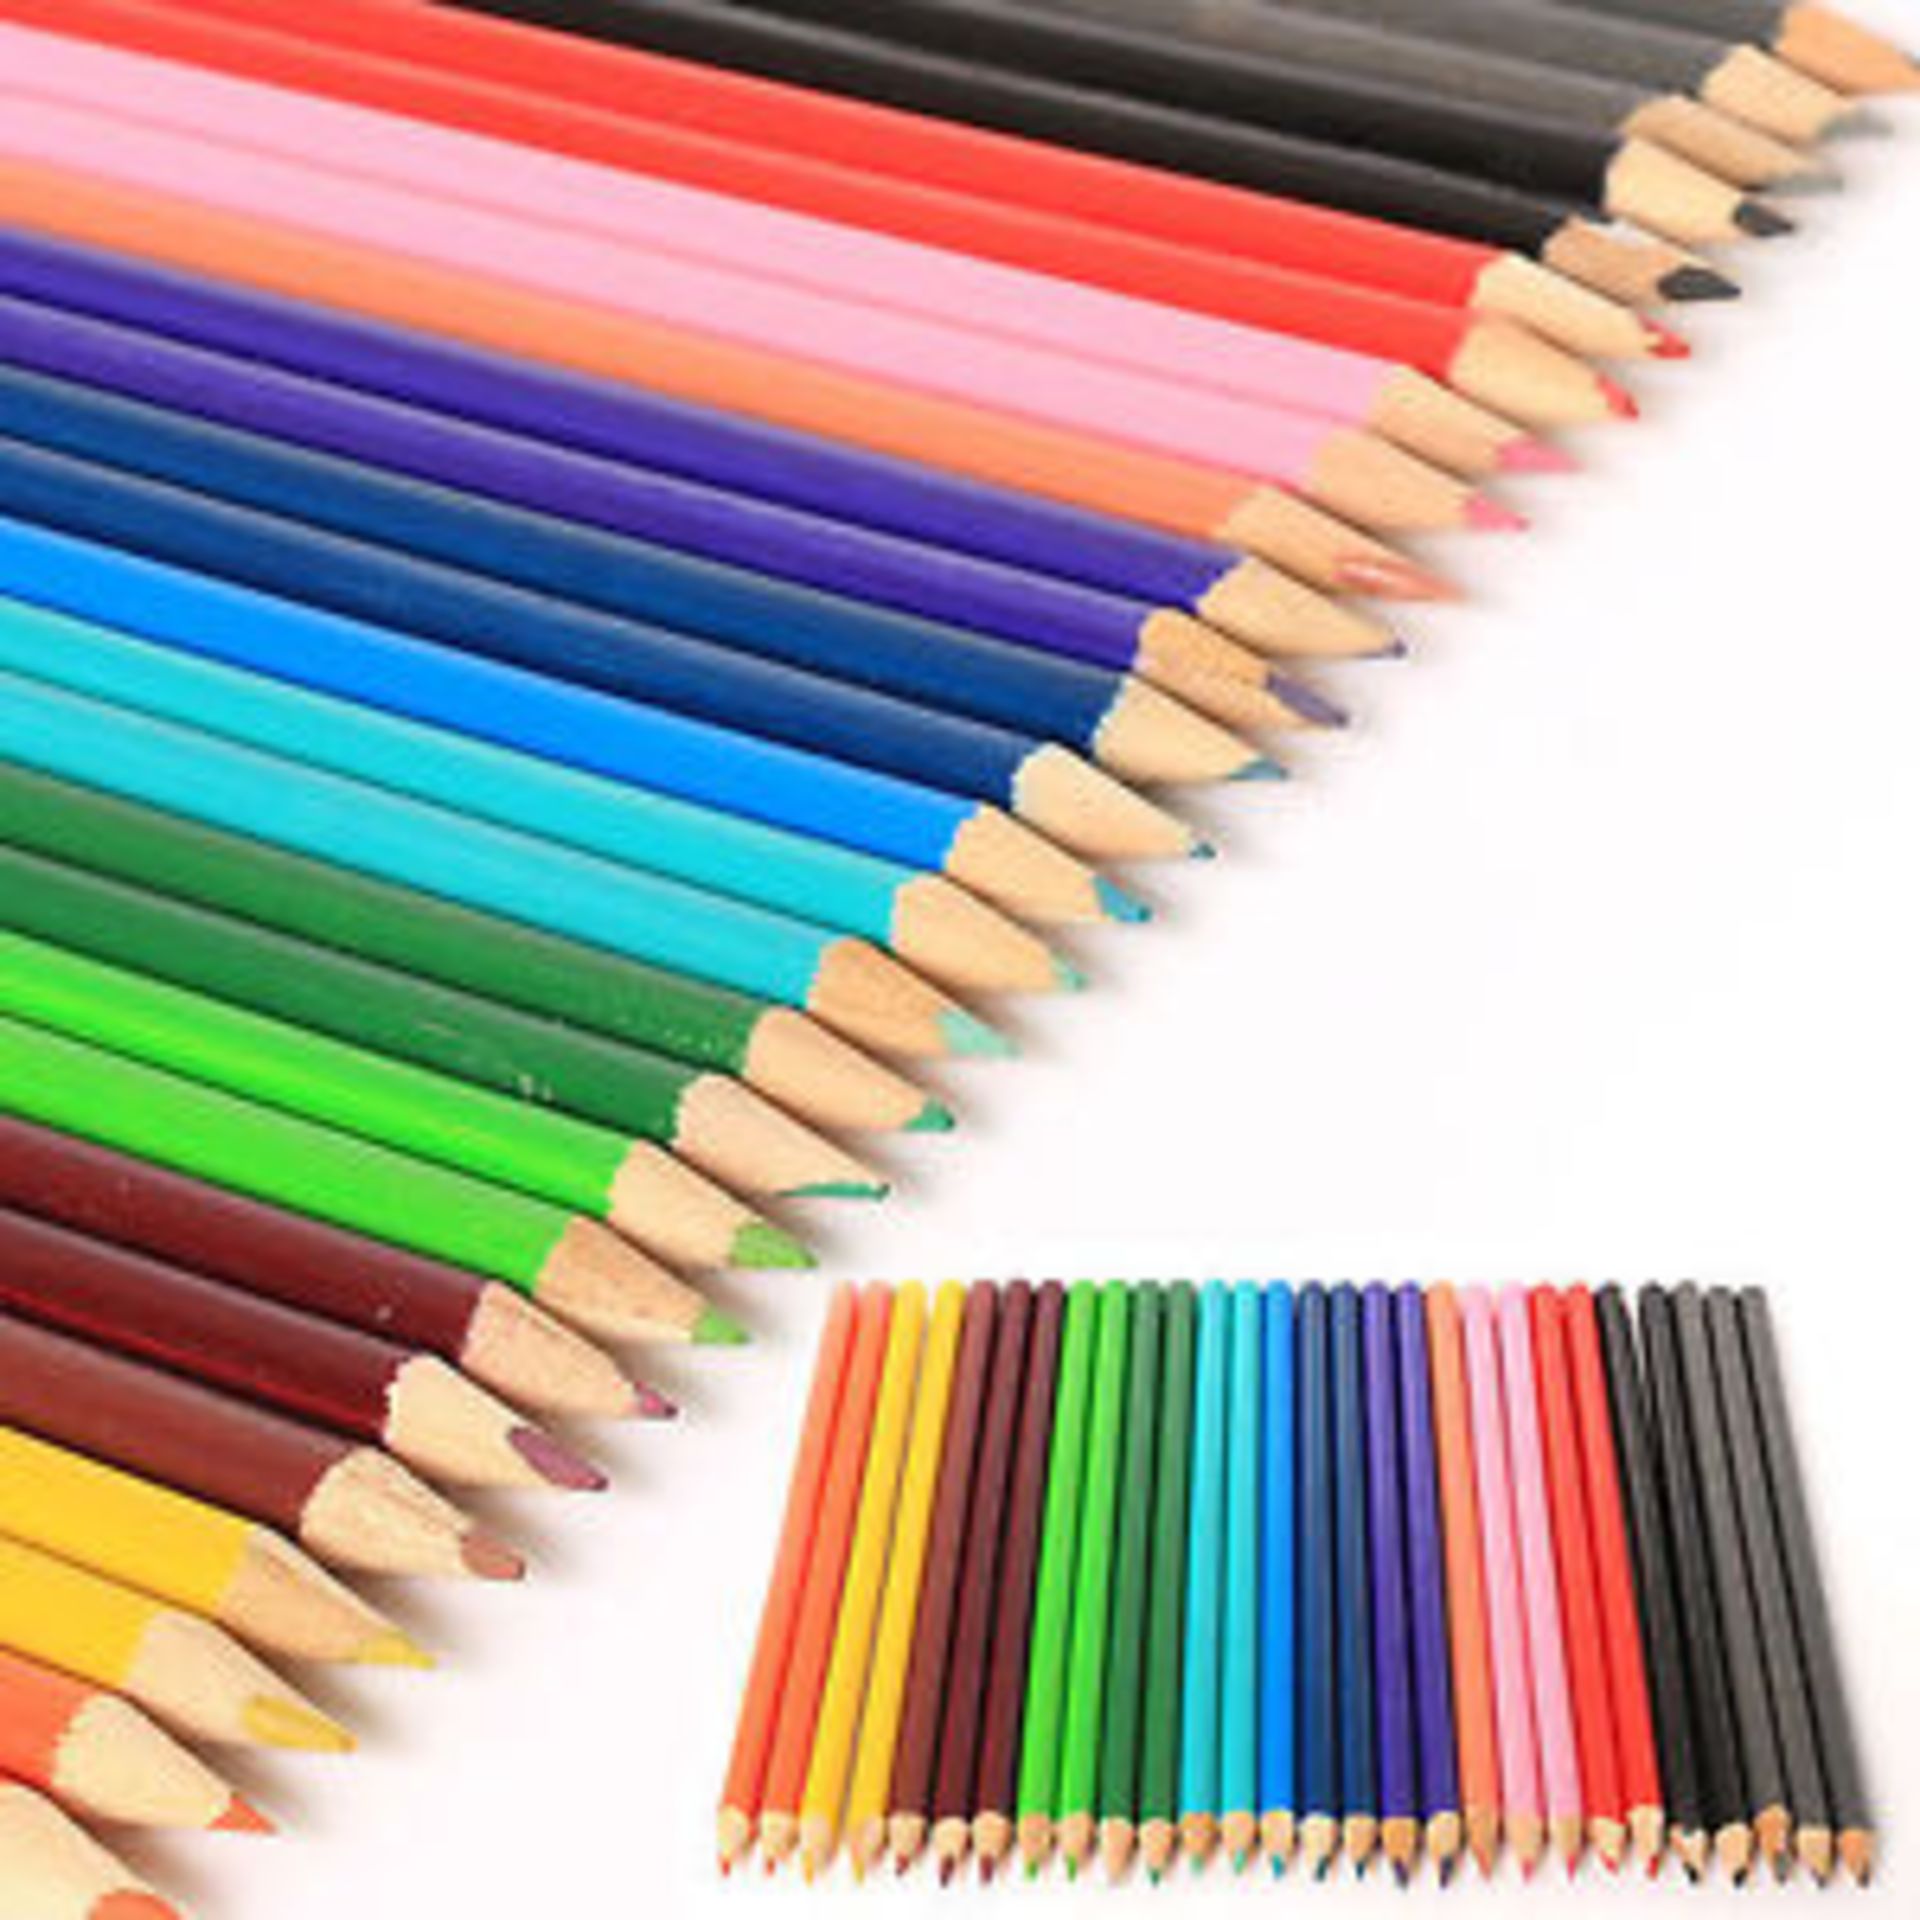 V Brand New 30 Pack Professional Colouring Pencils - Artist Quality X 2 YOUR BID PRICE TO BE - Bild 2 aus 2